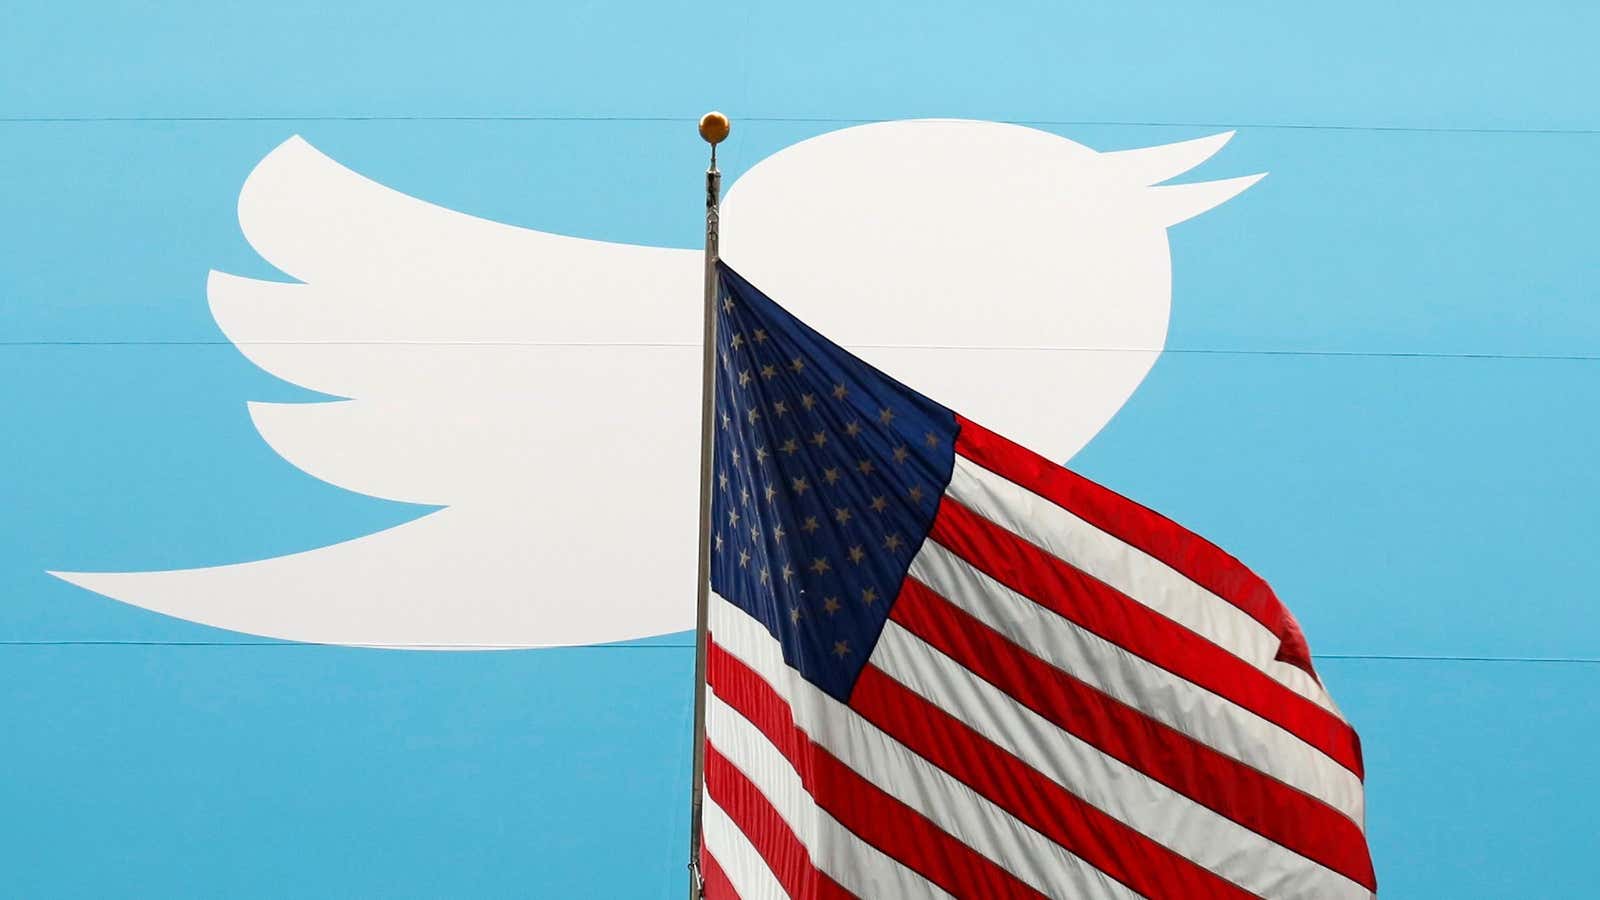 The Twitter Inc. logo is shown with the U.S. flag